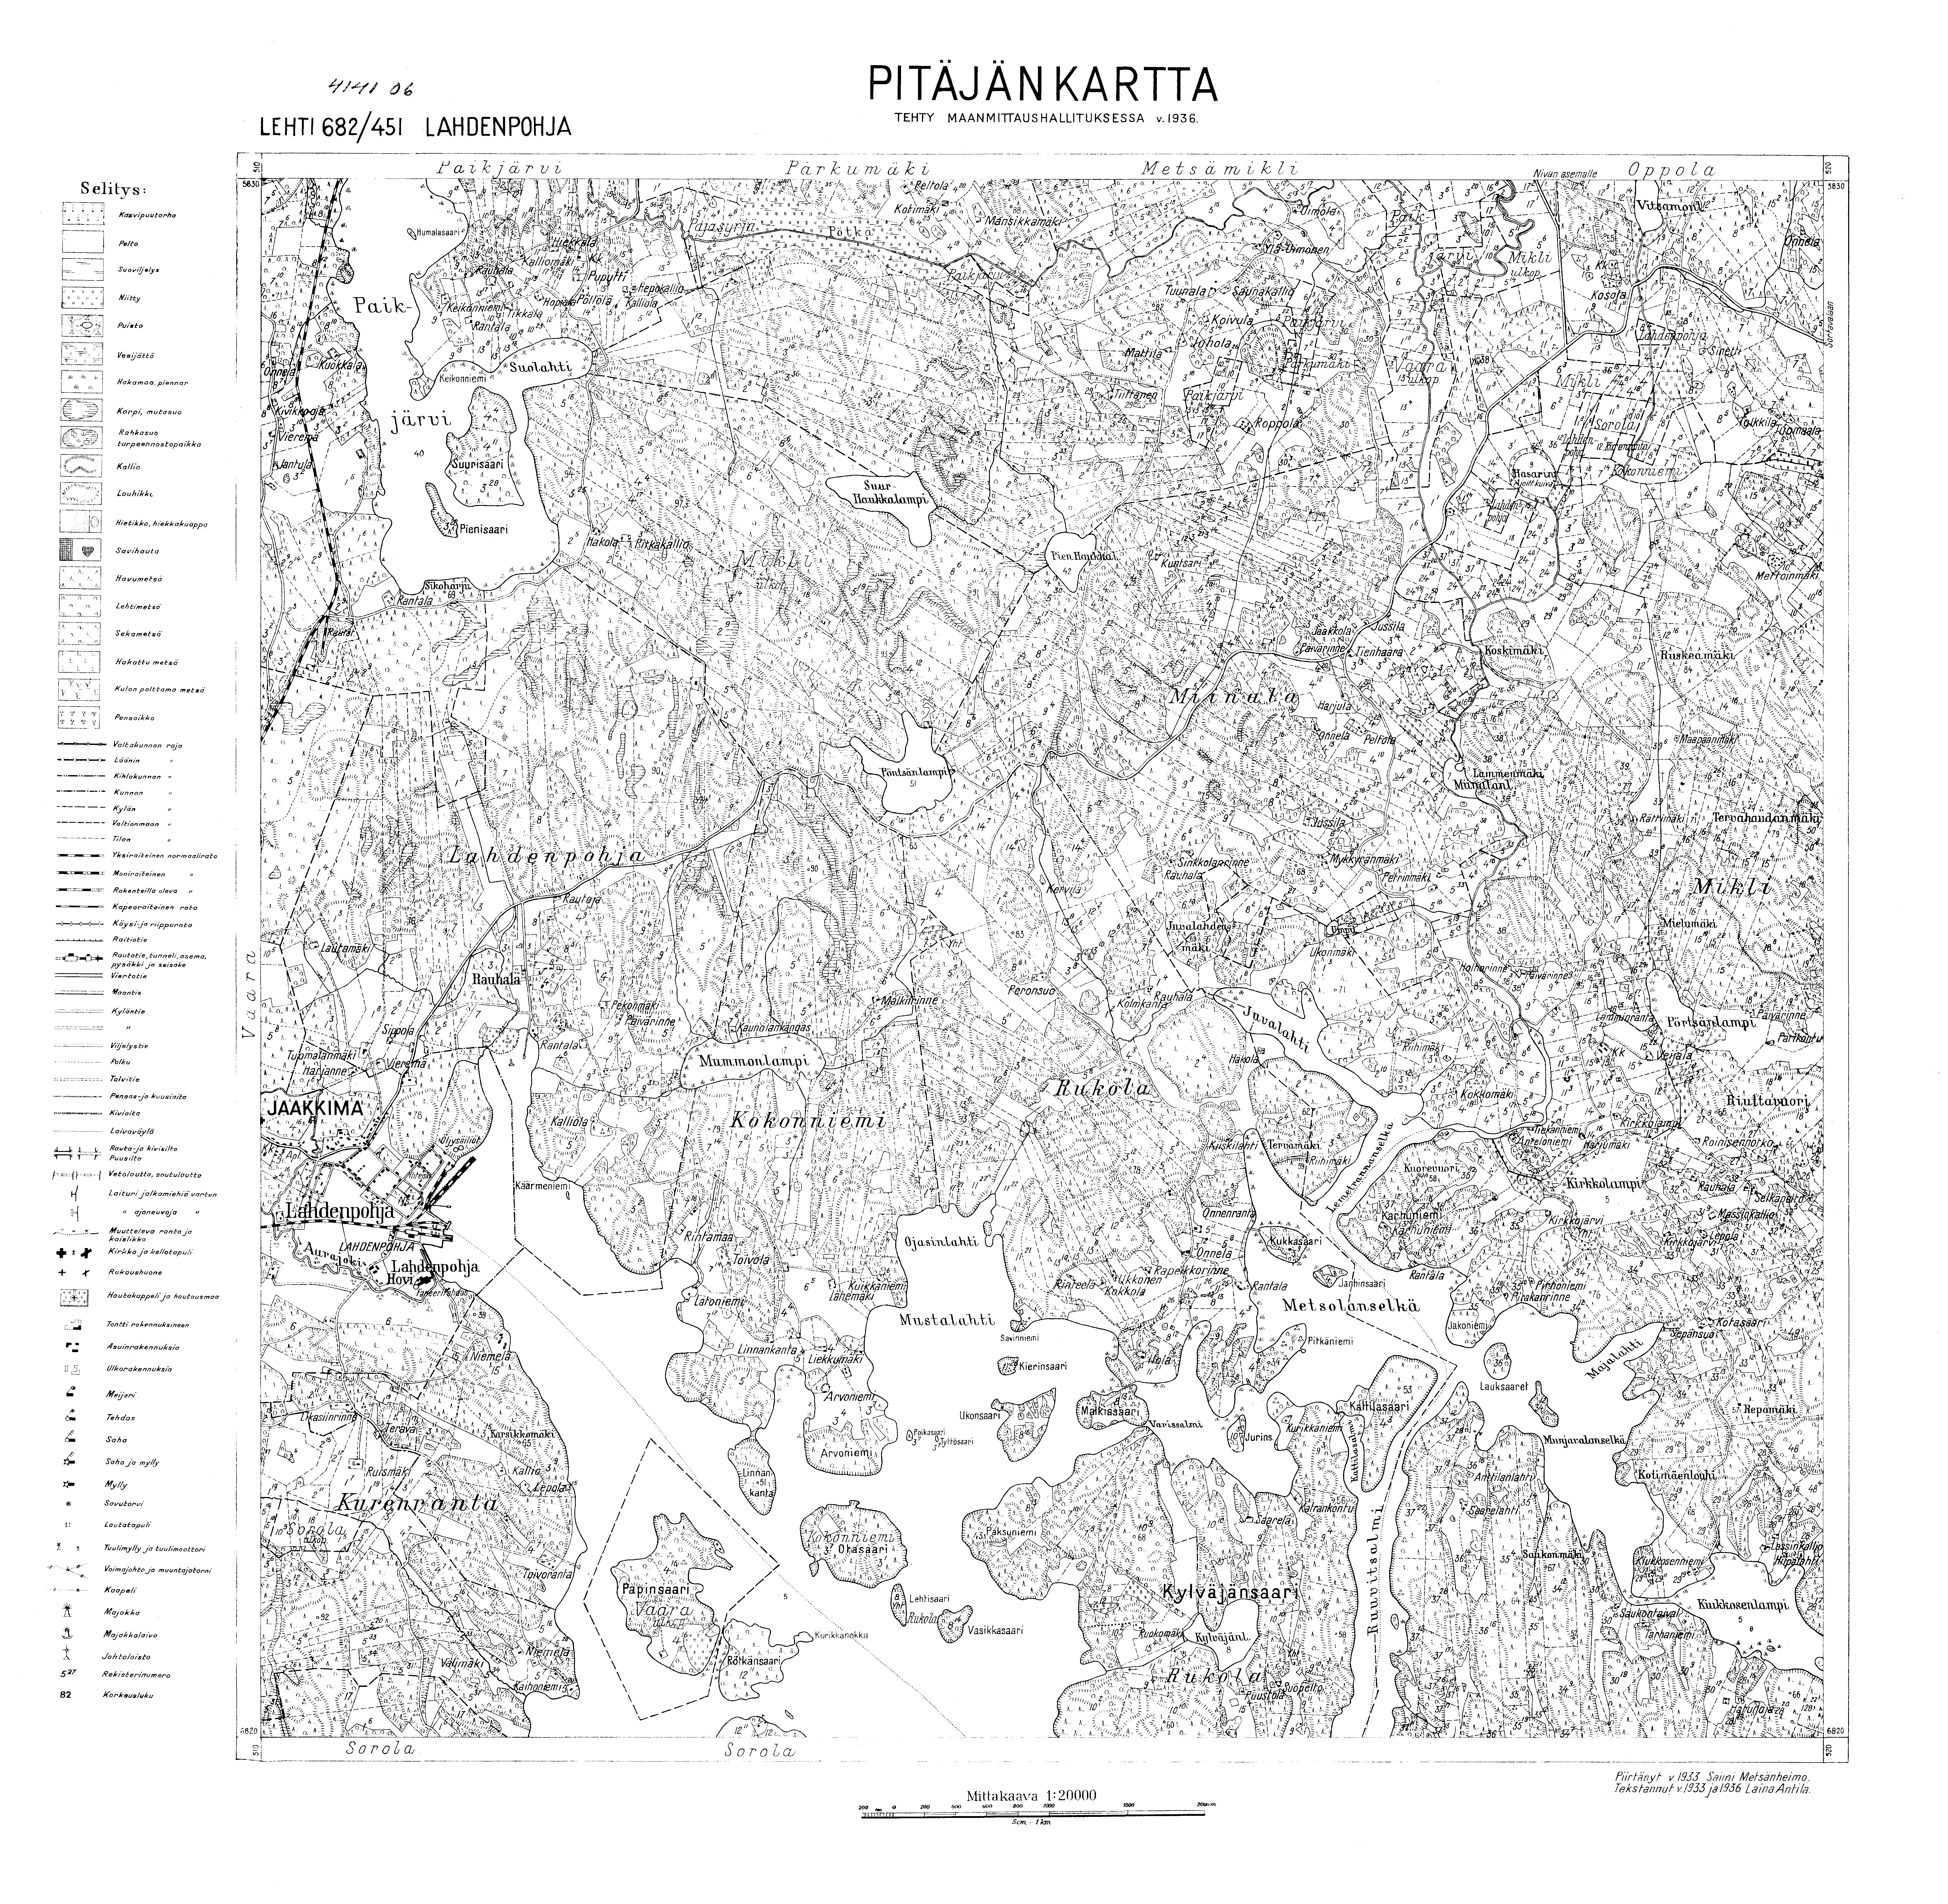 Lahdenpohja. Pitäjänkartta 414106. Parish map from 1933. Use the zooming tool to explore in higher level of detail. Obtain as a quality print or high resolution image